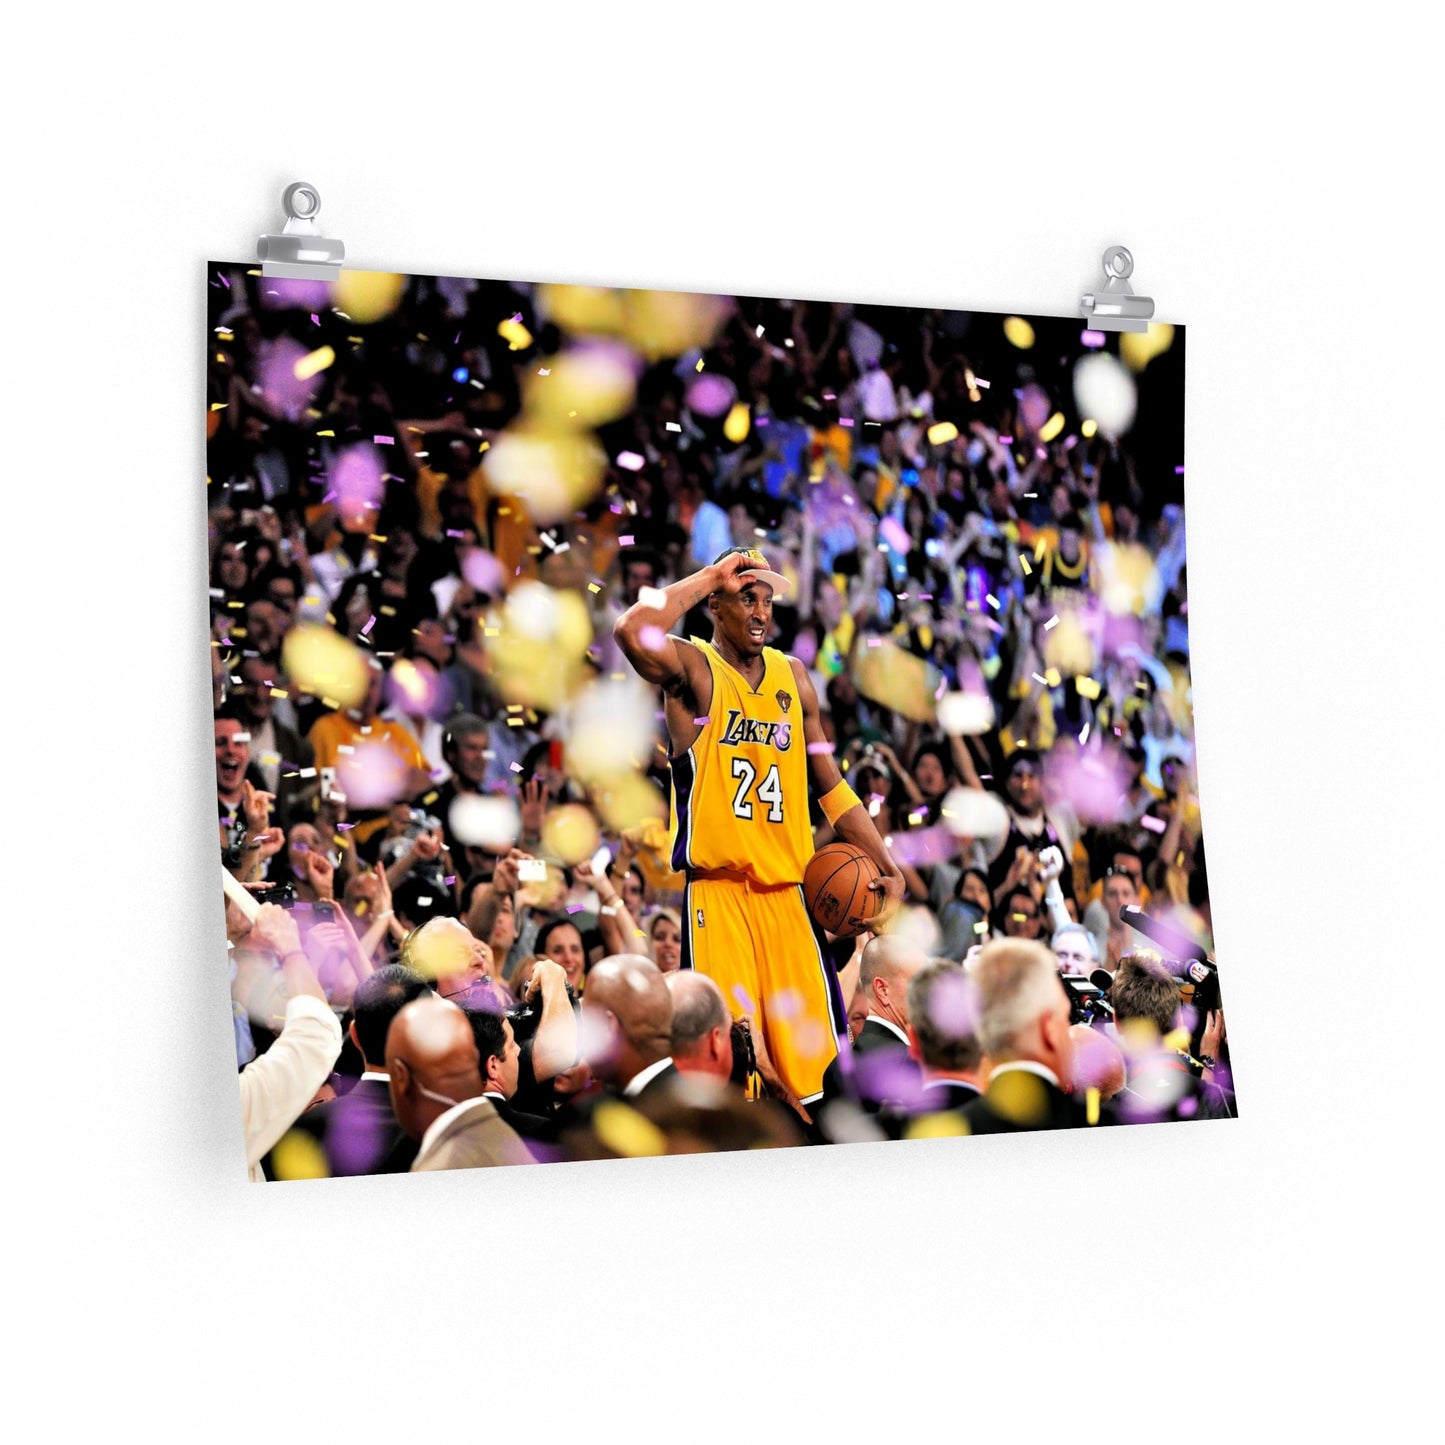 Kobe Bryant Celebrates Finals Win With Confetti In Crowd In Yellow Los Angeles Lakers 24 Jersey Poster